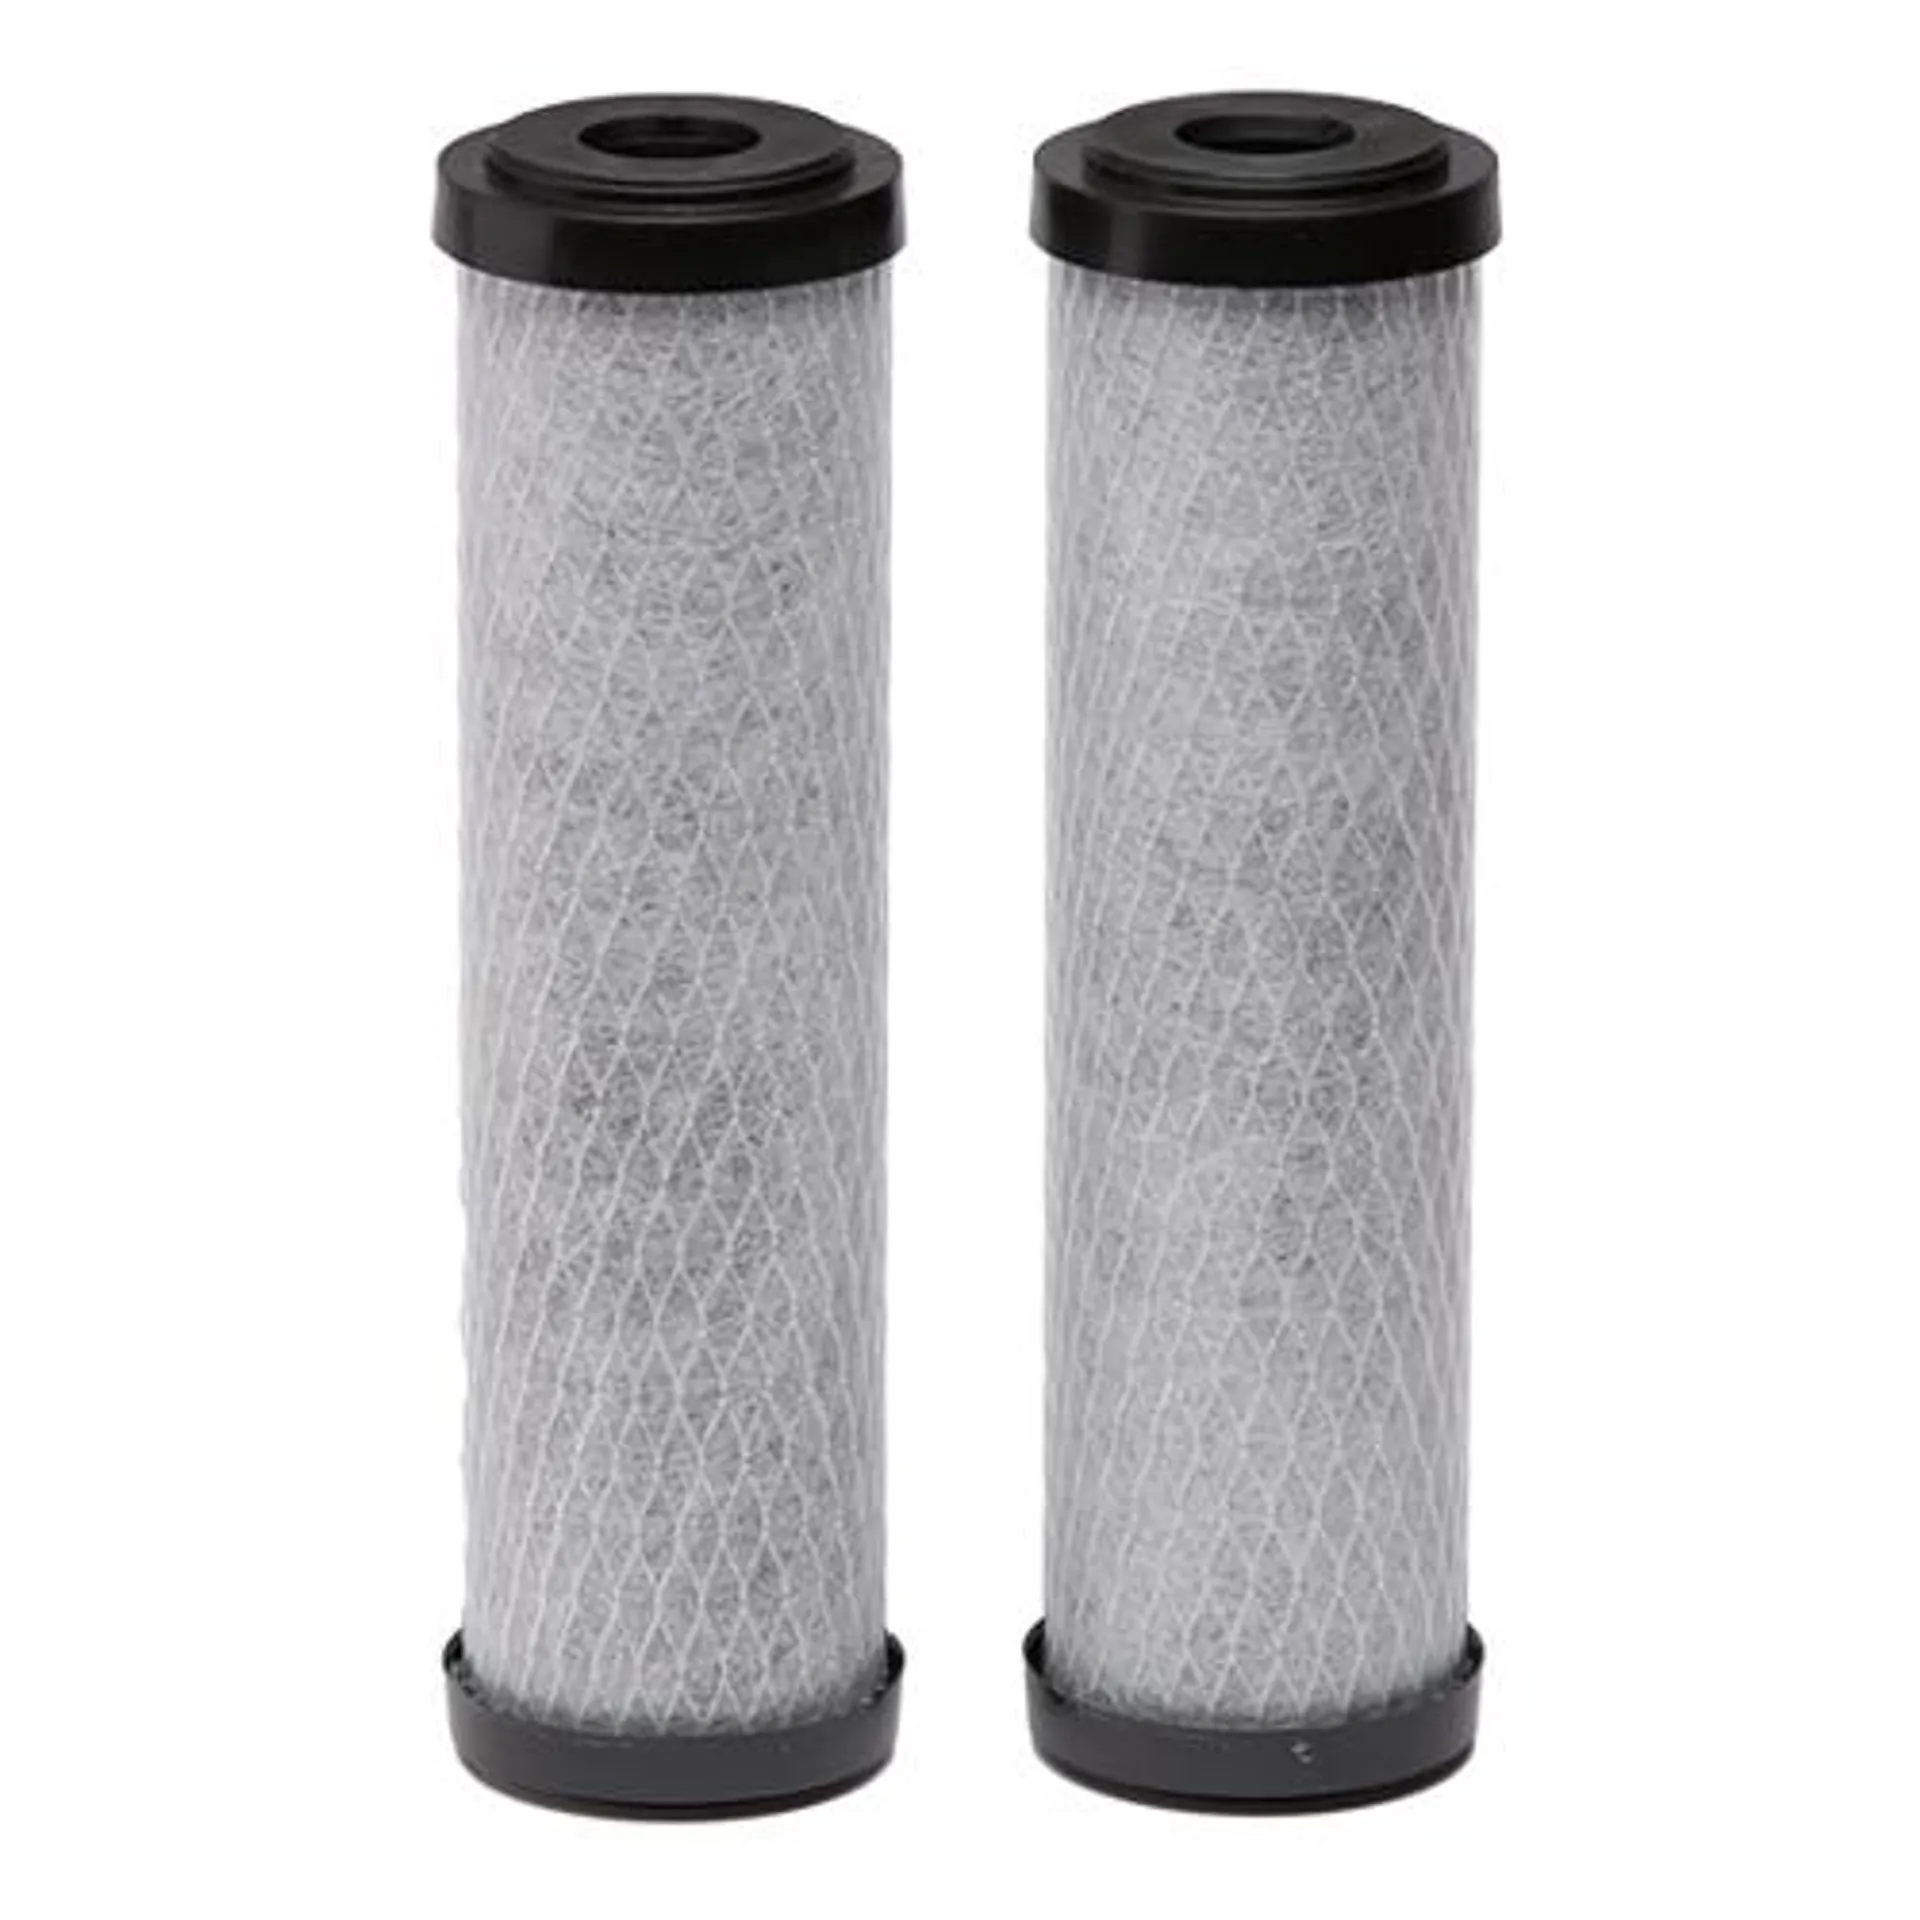 EcoPure Carbon Universal Whole Home Water Filter - 2 Pack